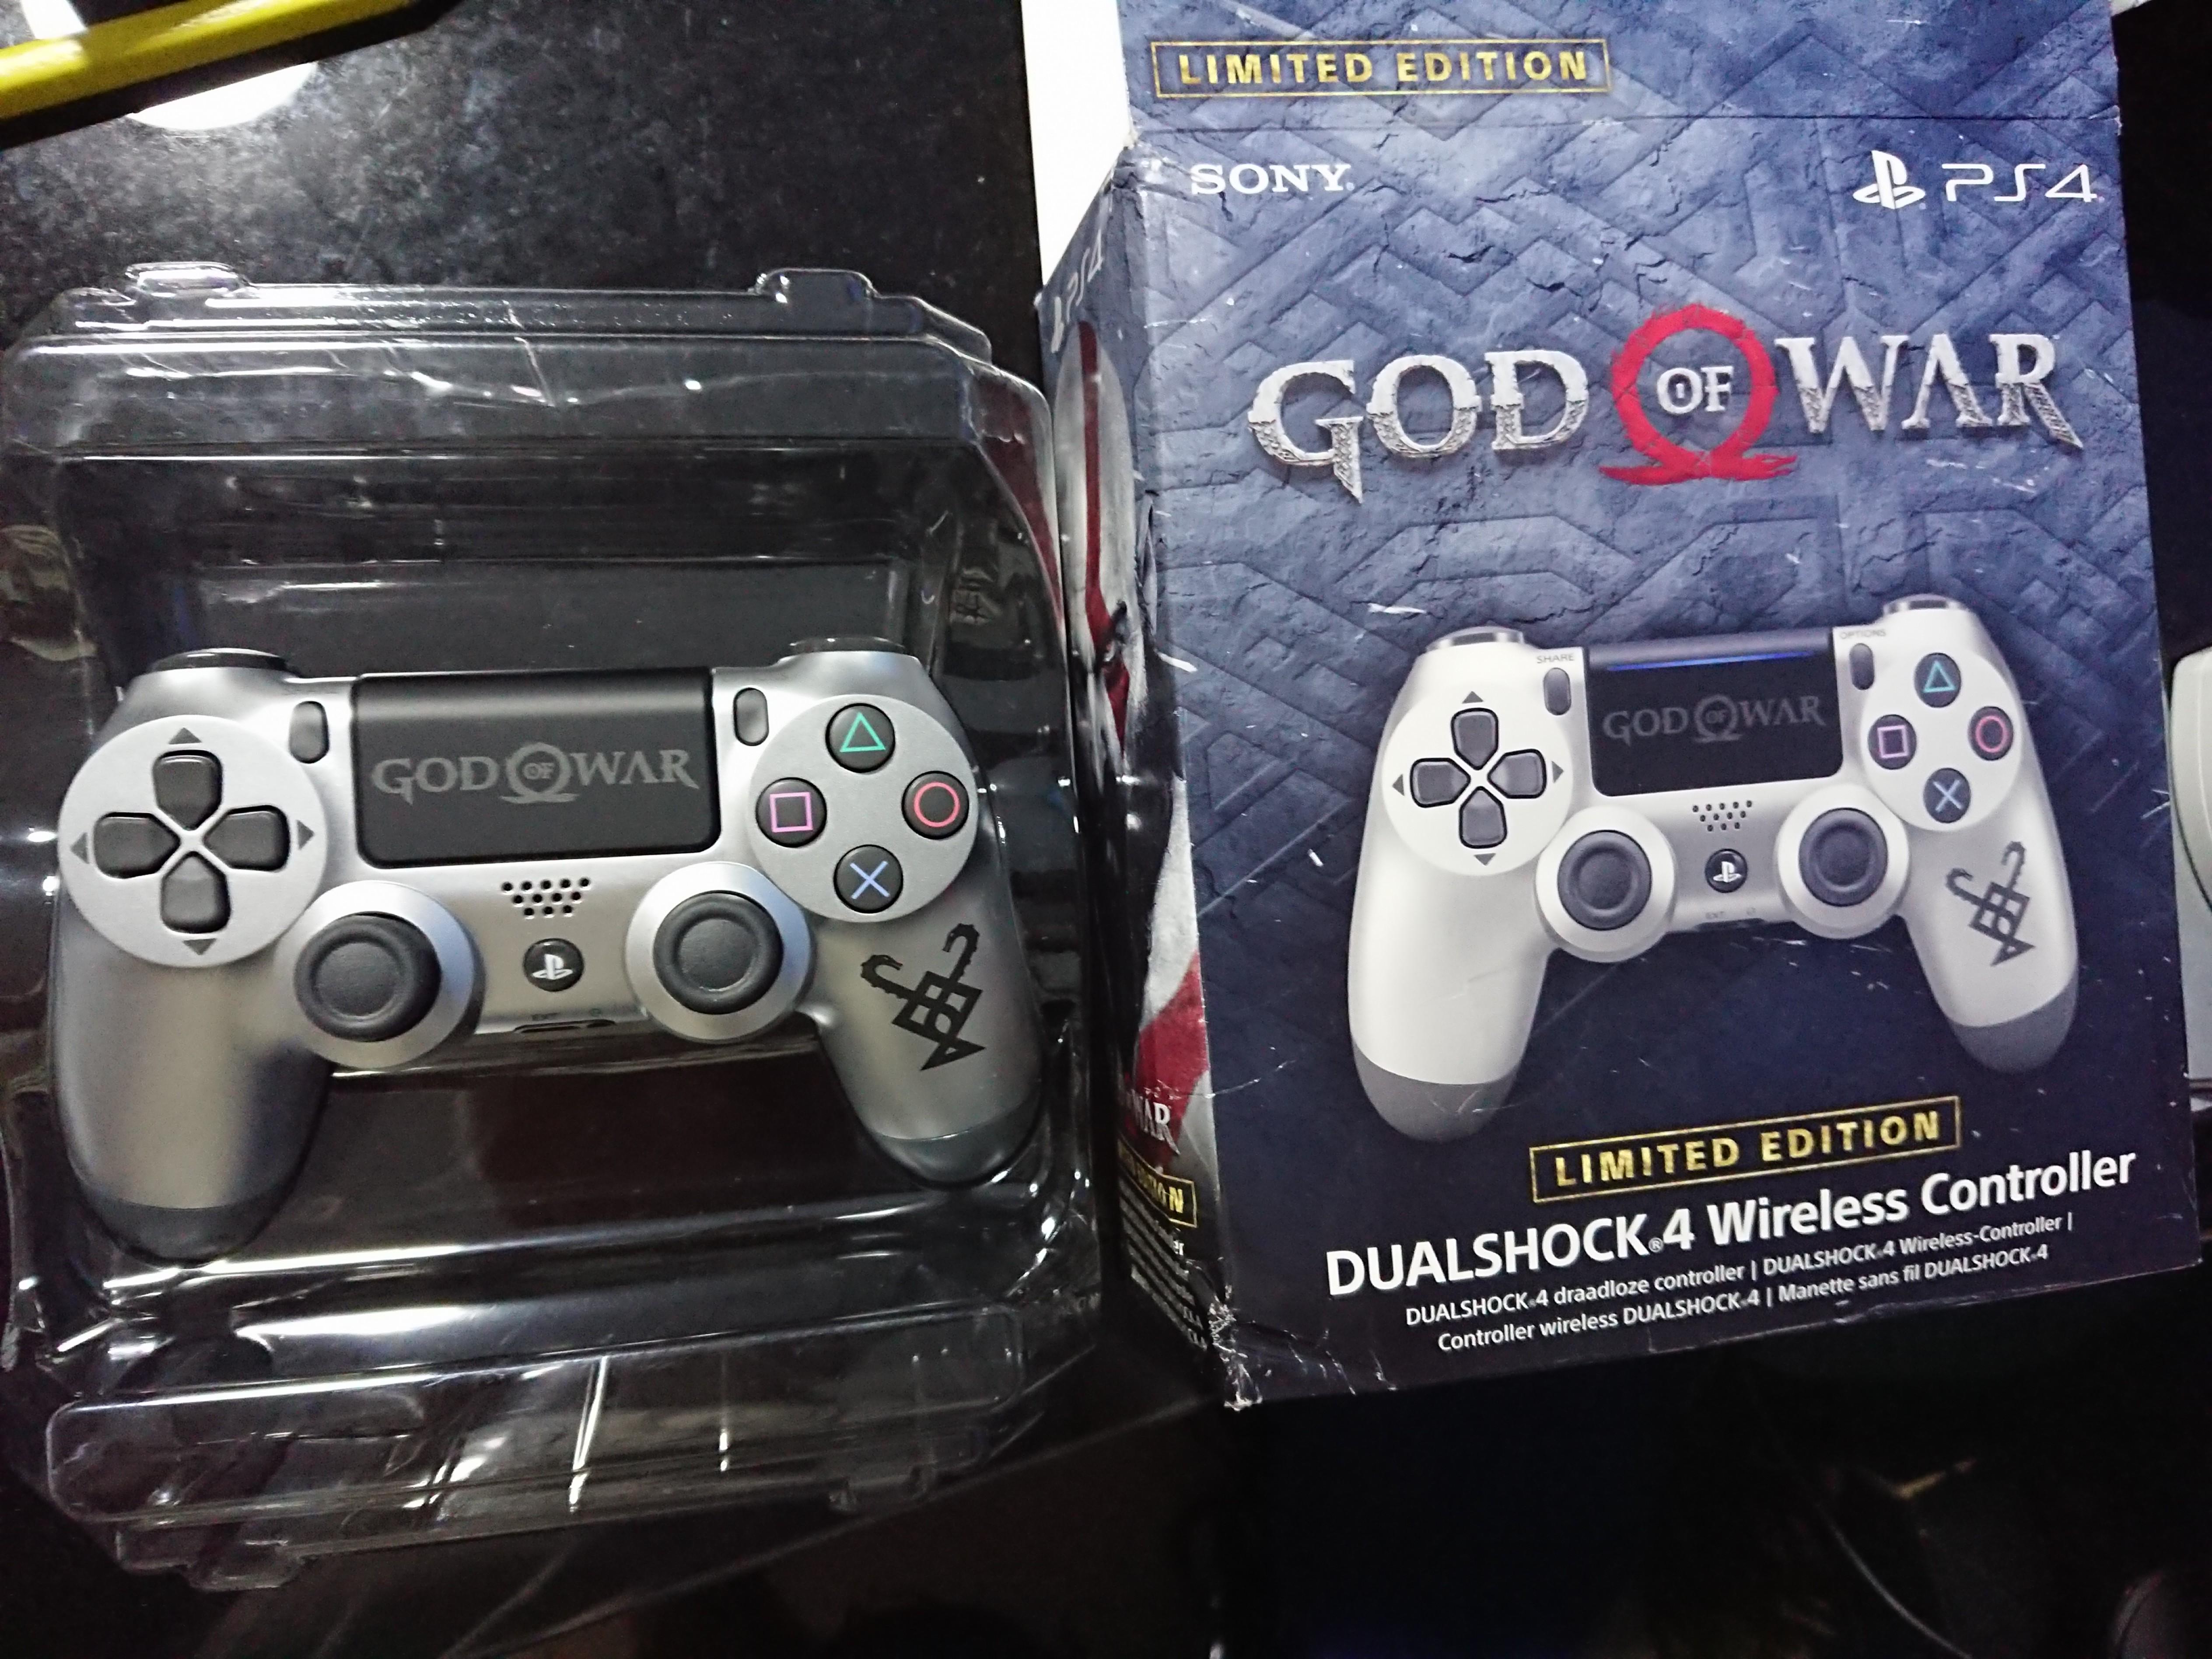 god of war limited edition ps4 controller